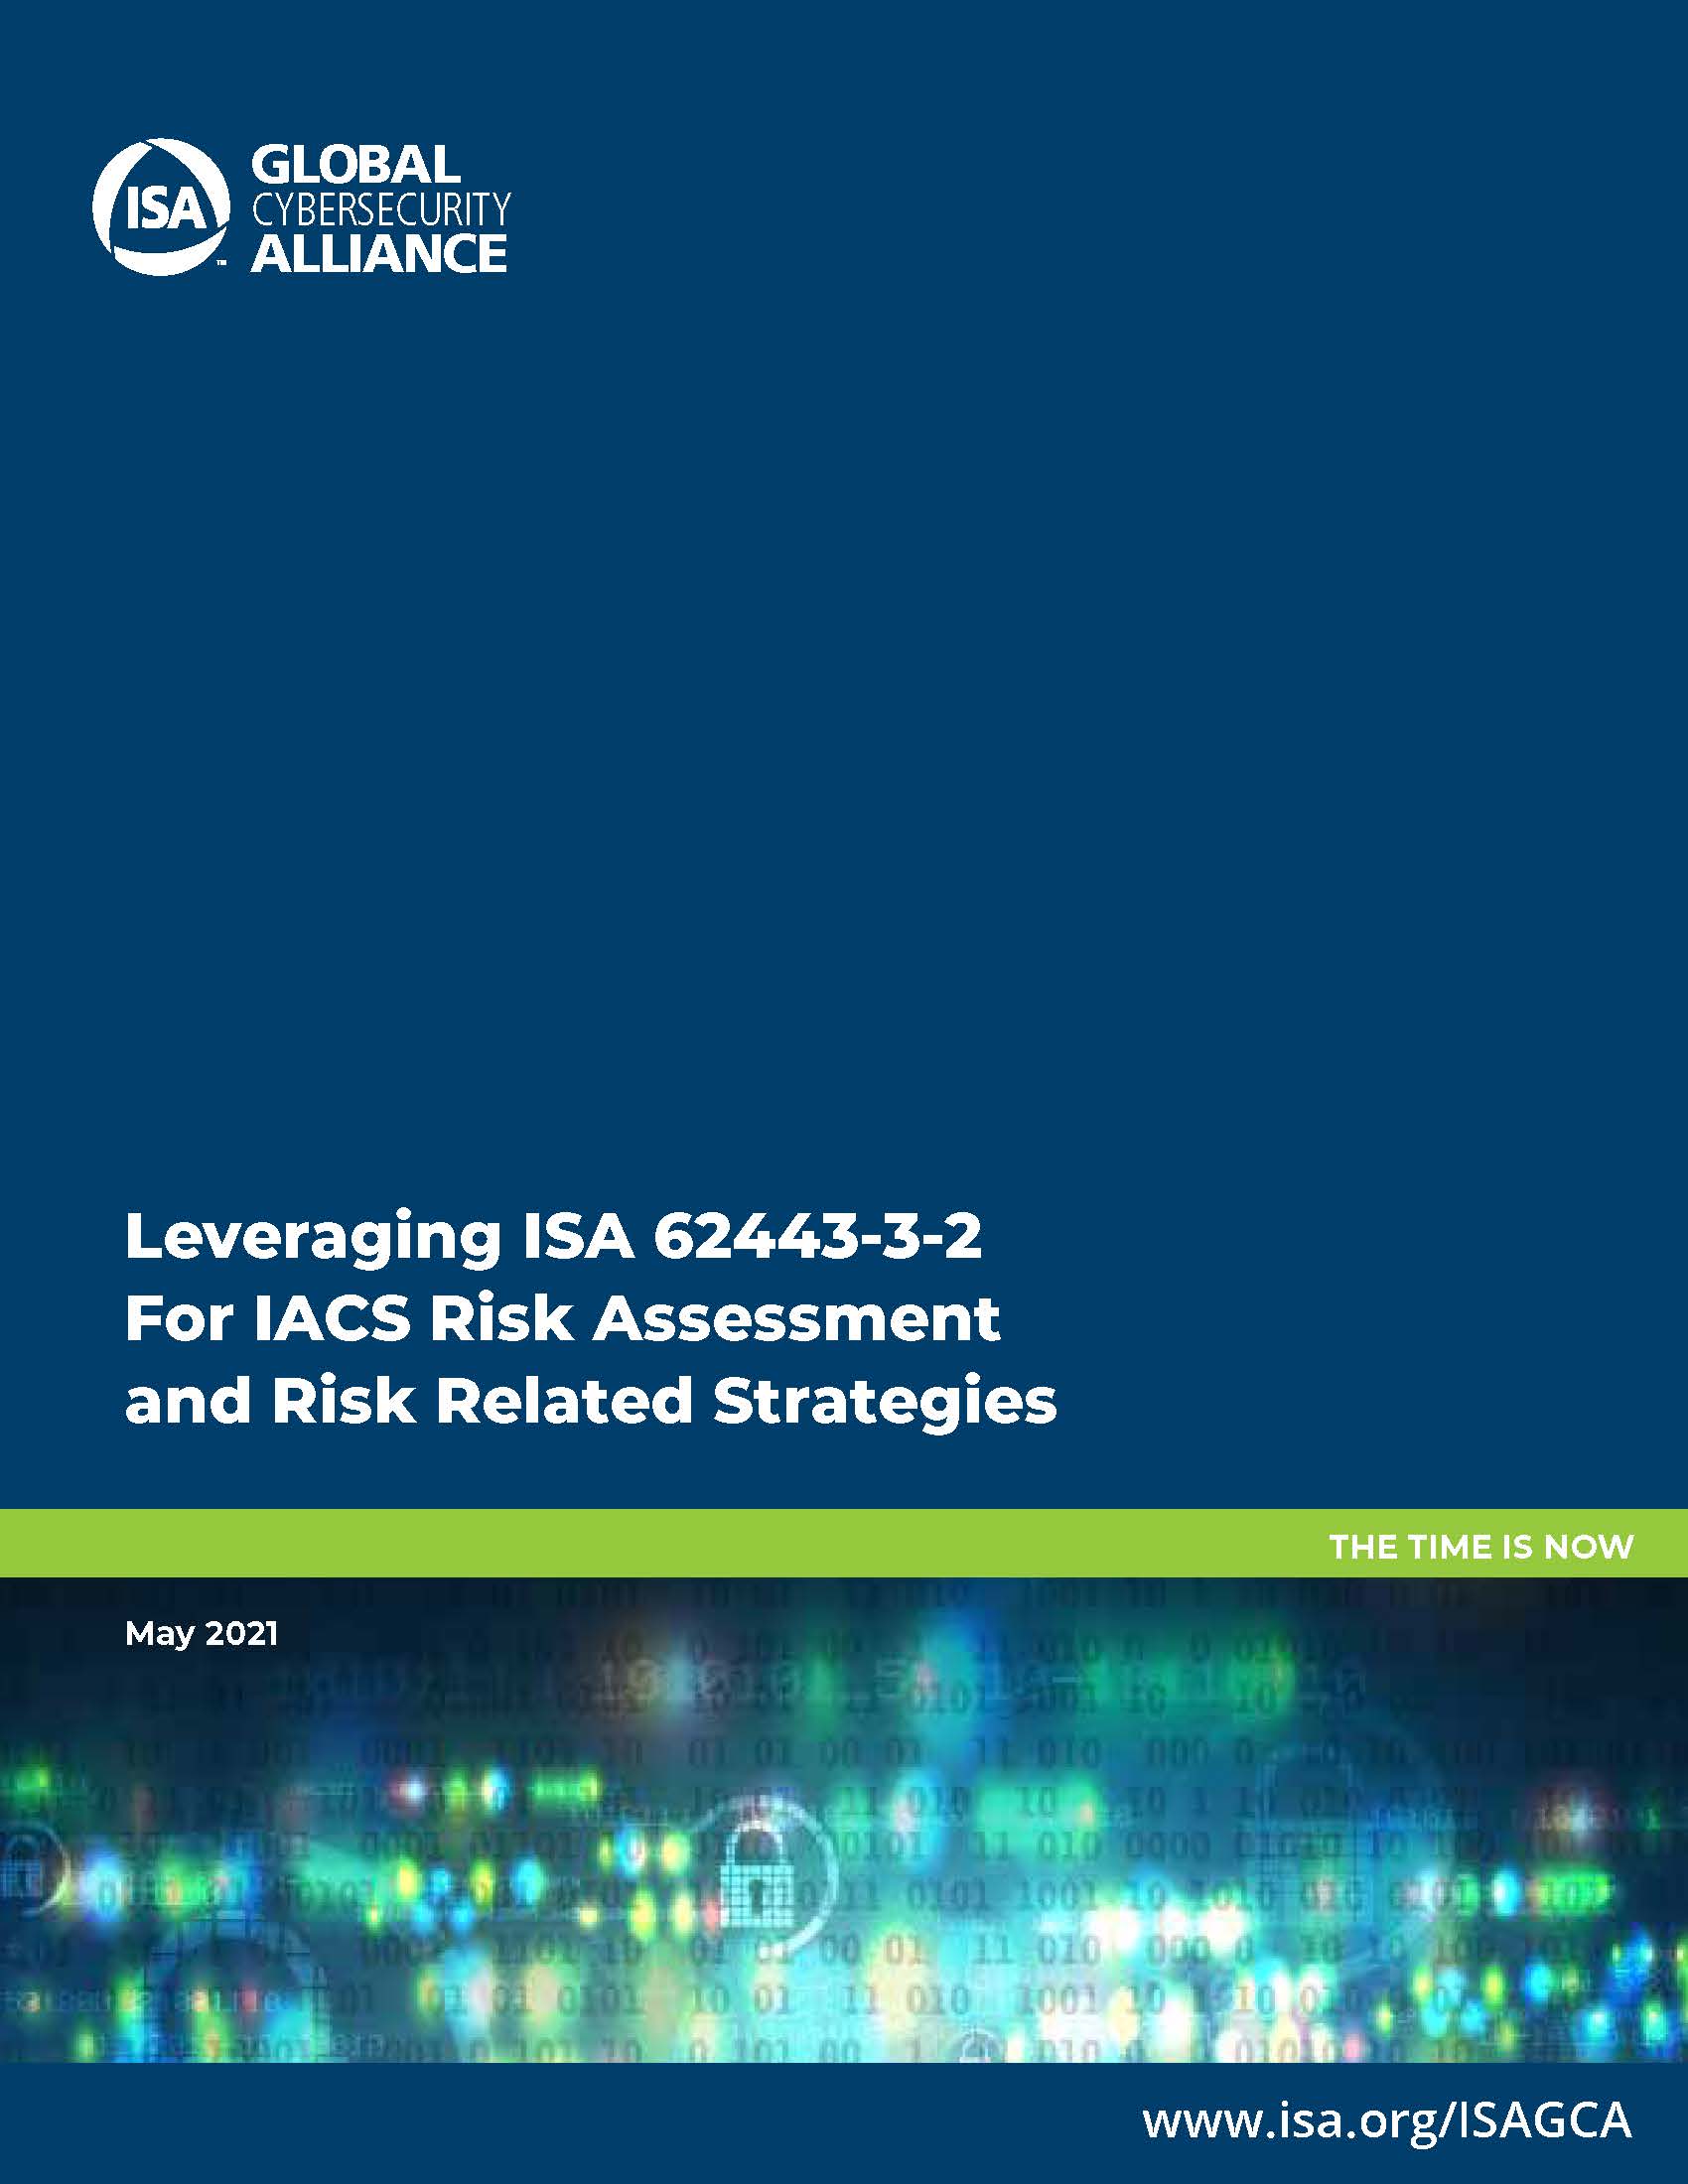 GCA-Leveraging ISA62443-7 wht paper_Page_01